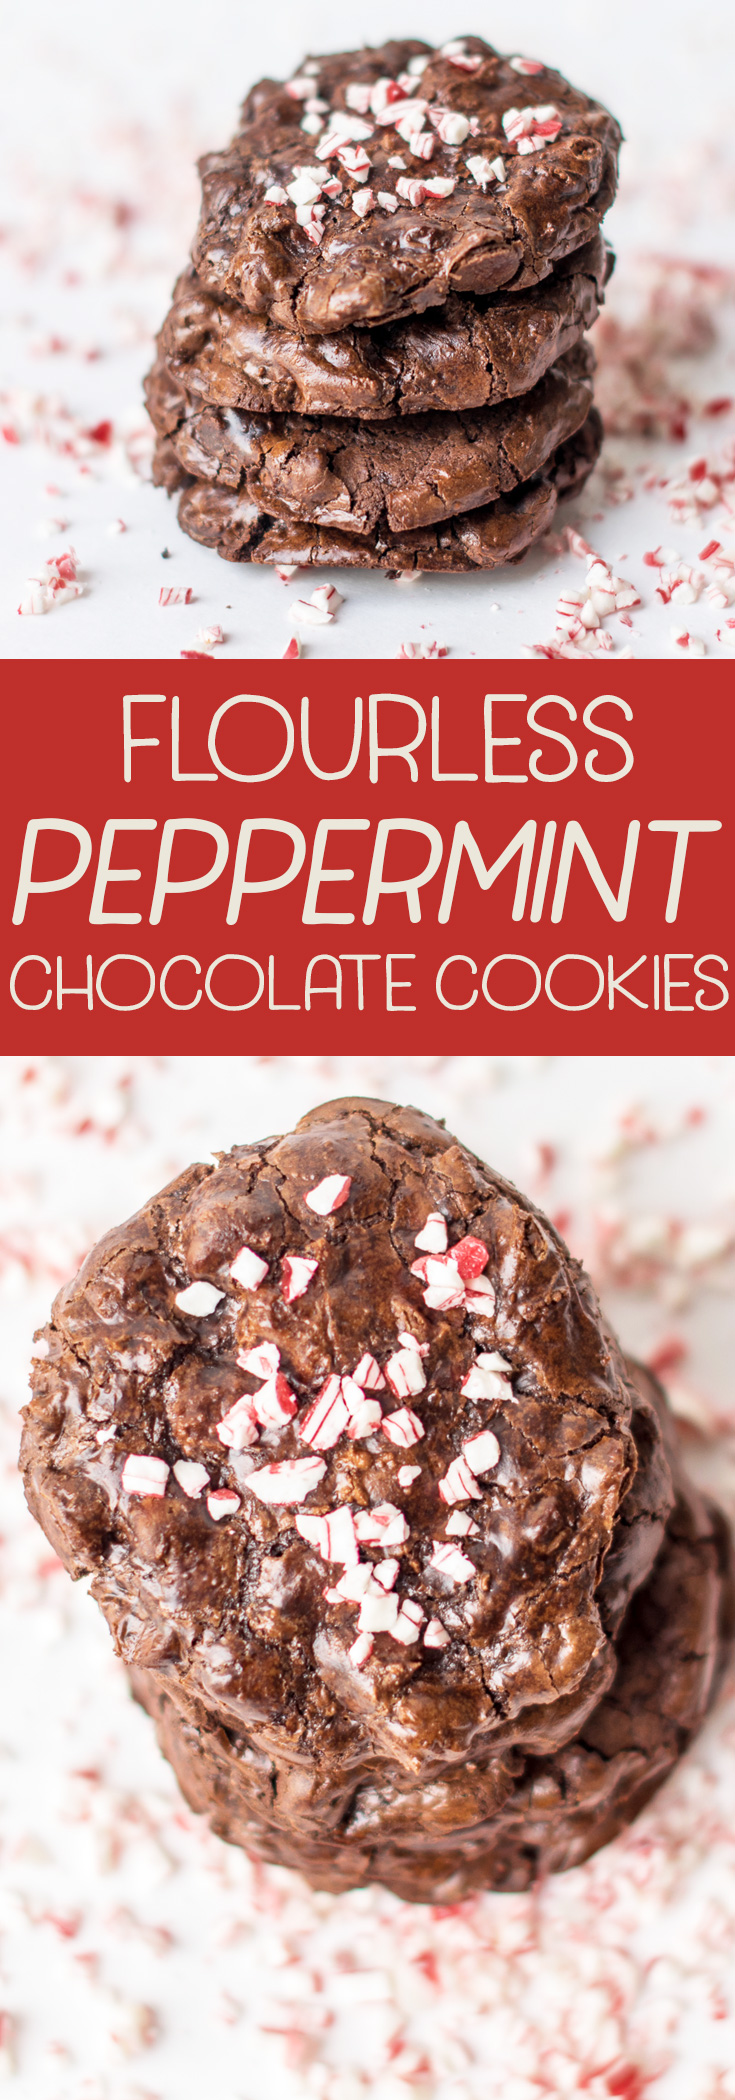 Perfect cookie to gift for the holidays! This recipe is naturally gluten free! Flourless Chocolate Peppermint Cookies are easy to make and a crowd-pleaser! #cookie #christmascookie #glutenfree #holidayrecipes via @mrsmajorhoff